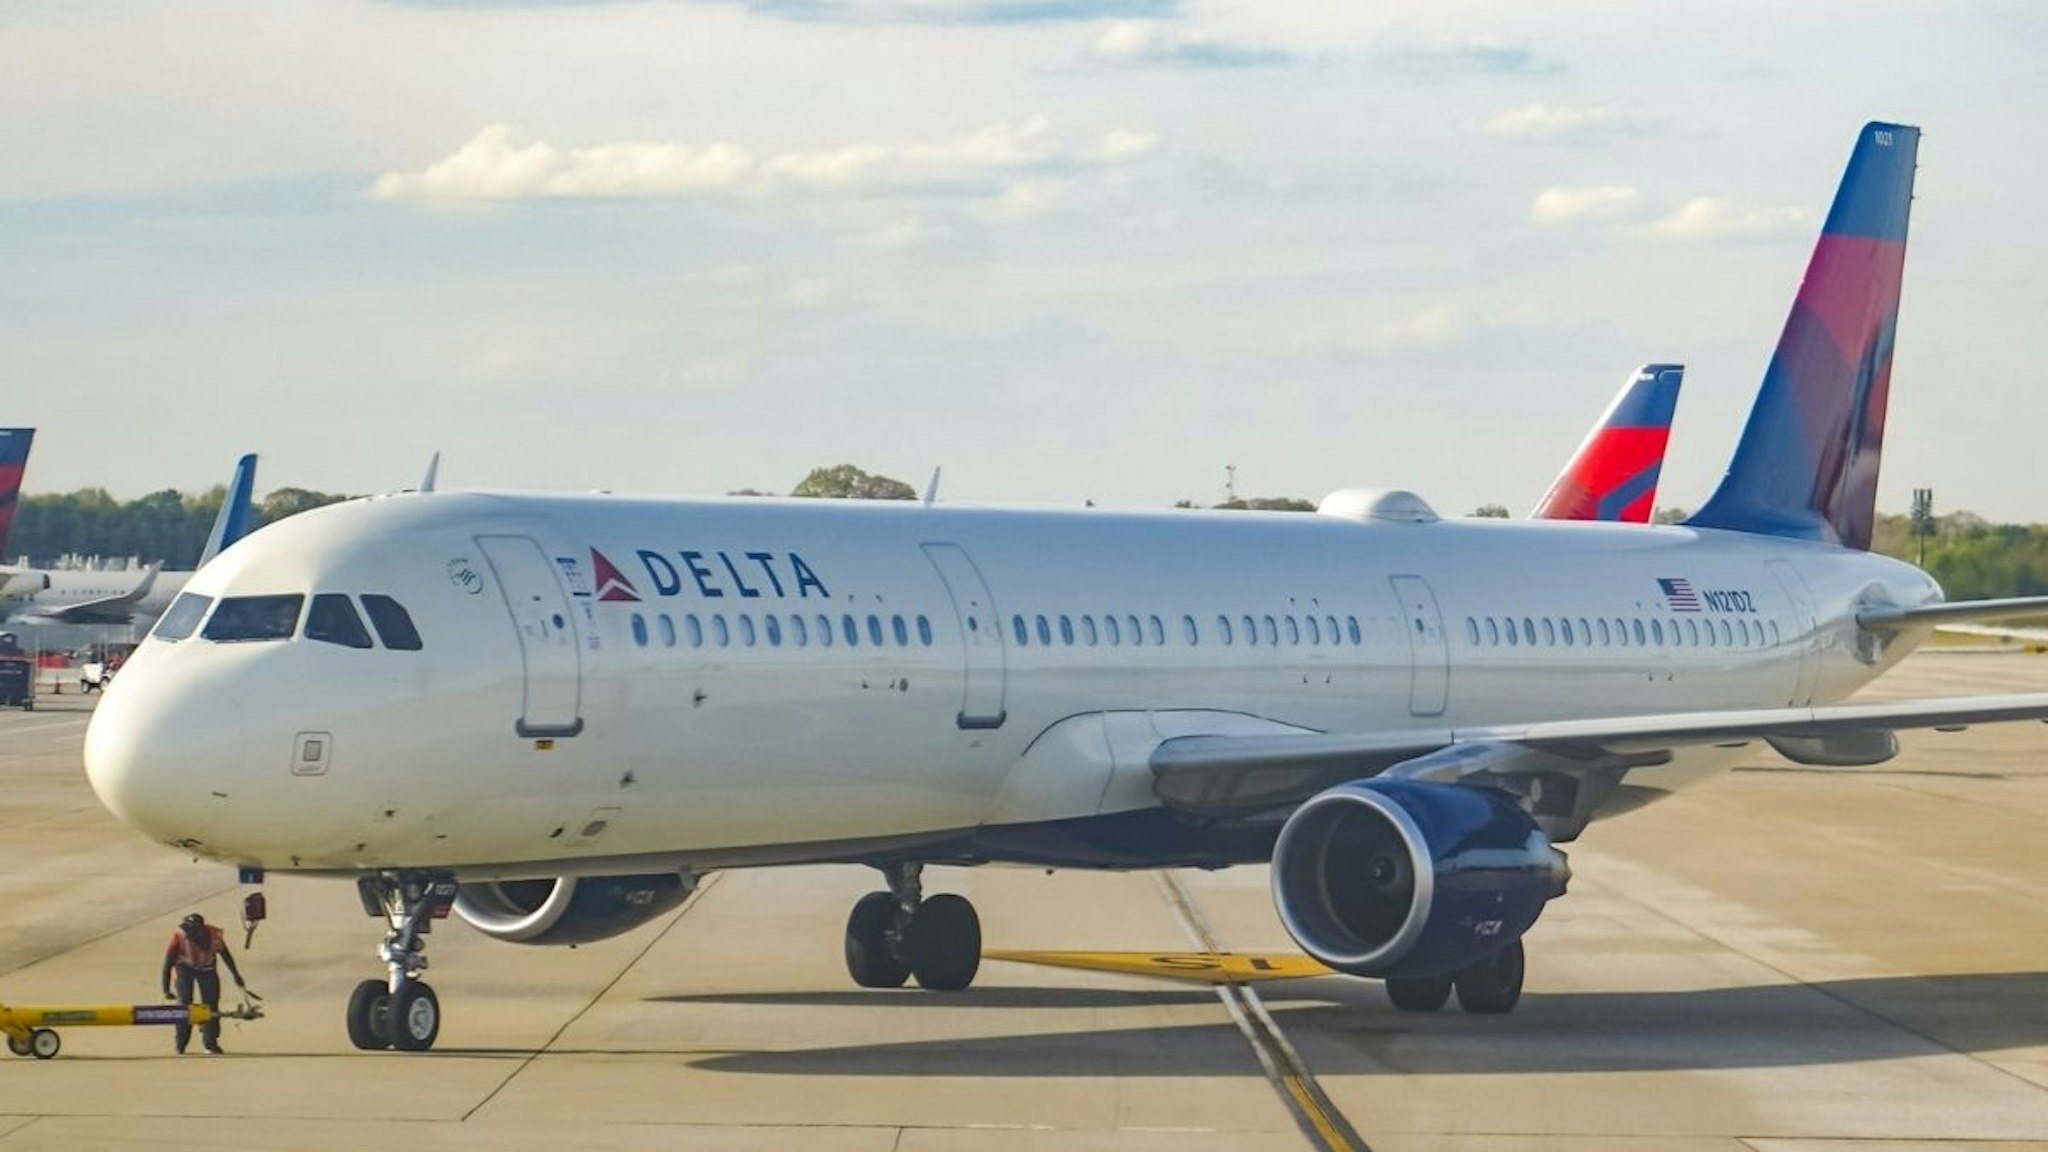 A Delta airlines airplane is seen parked at Hartsfield-Jackson International Airport in Atlanta.